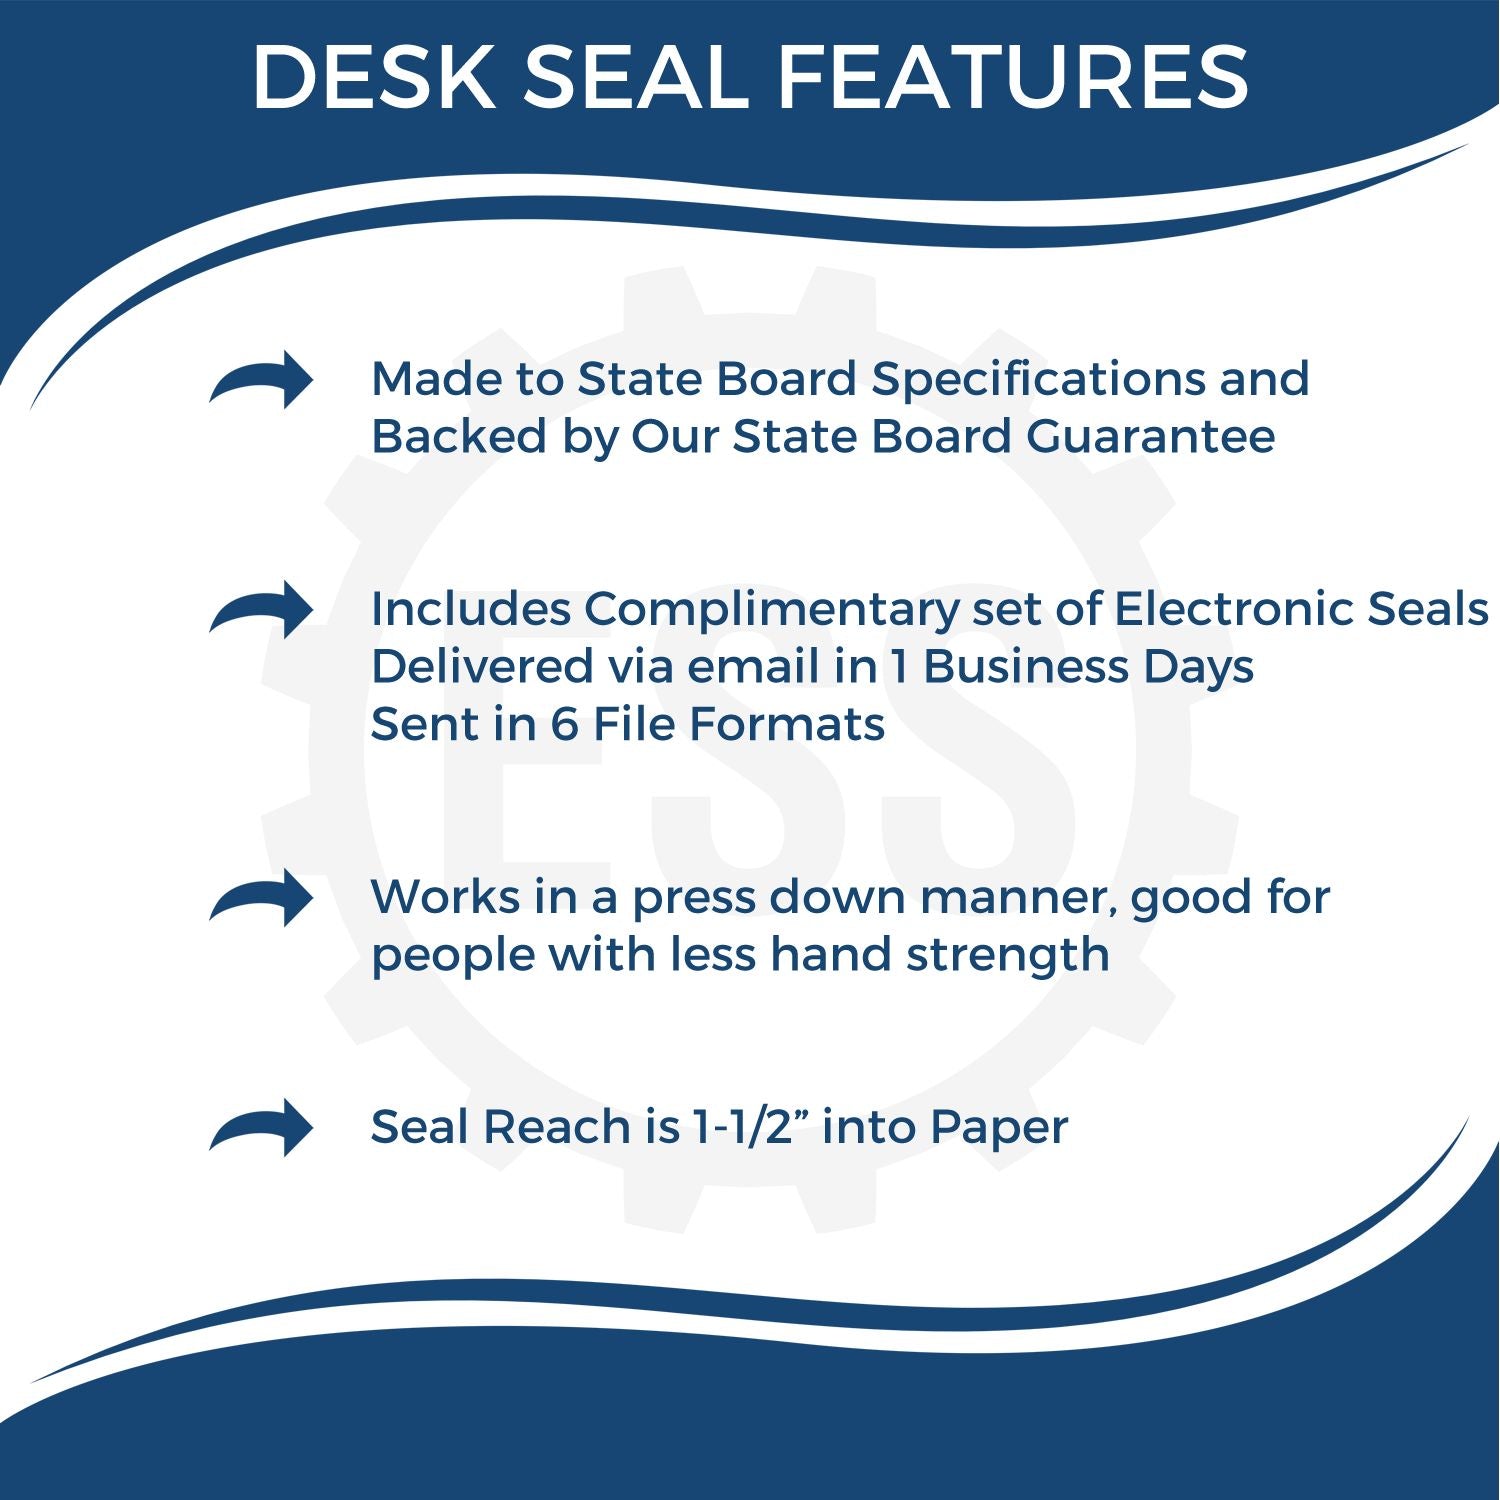 A picture of an infographic highlighting the selling points for the New York Desk Surveyor Seal Embosser